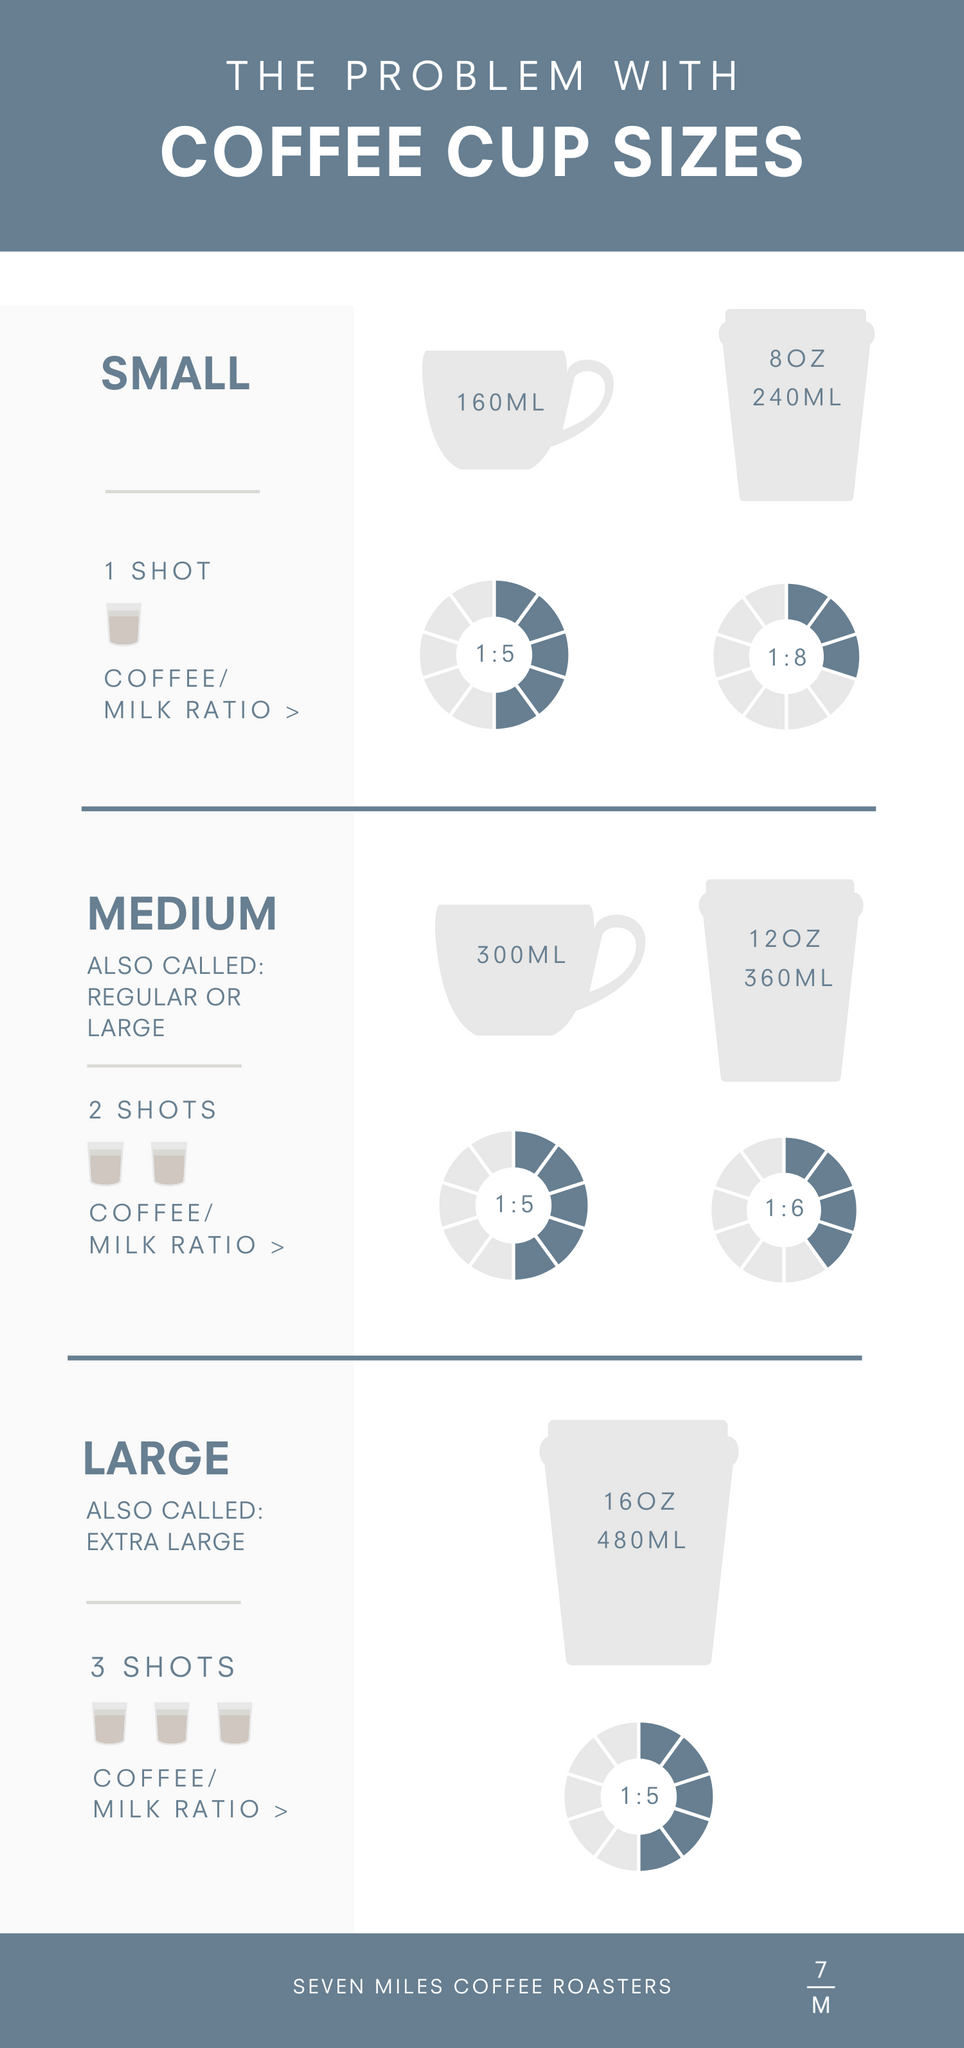 The Problem With Coffee Cup Sizes